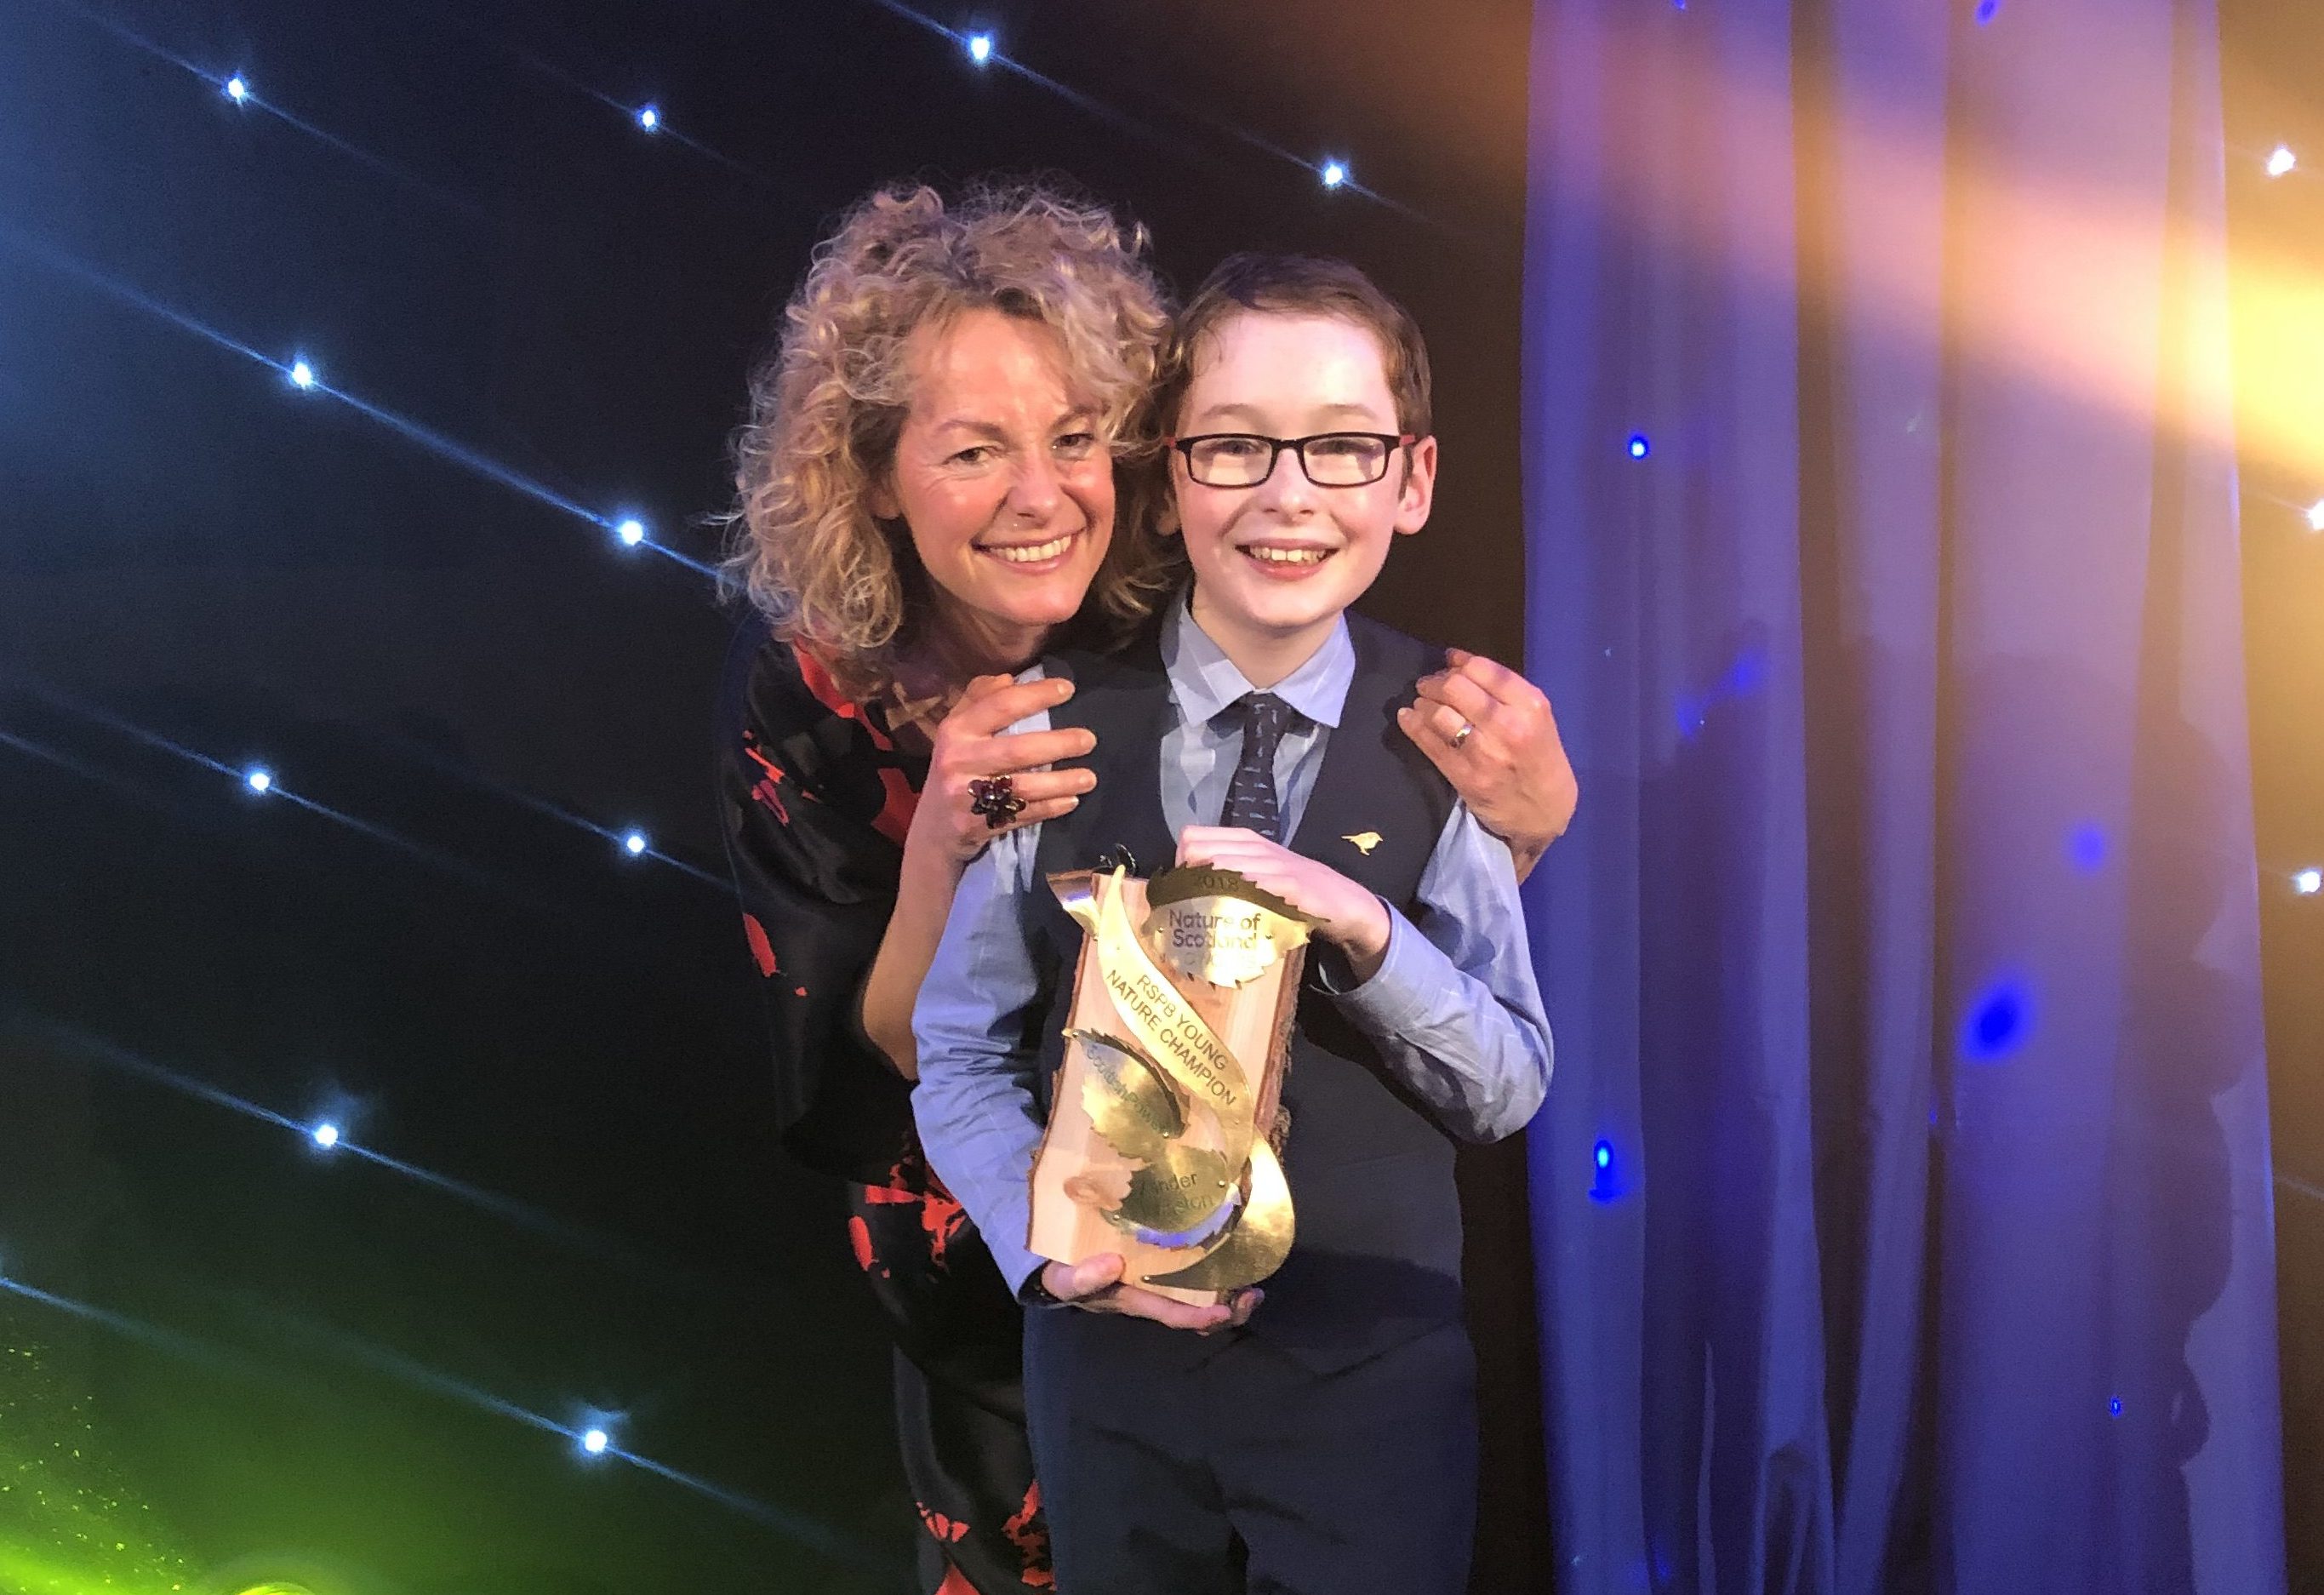 Xander Johnston receiving the RSPB award for Young Nature Champion.